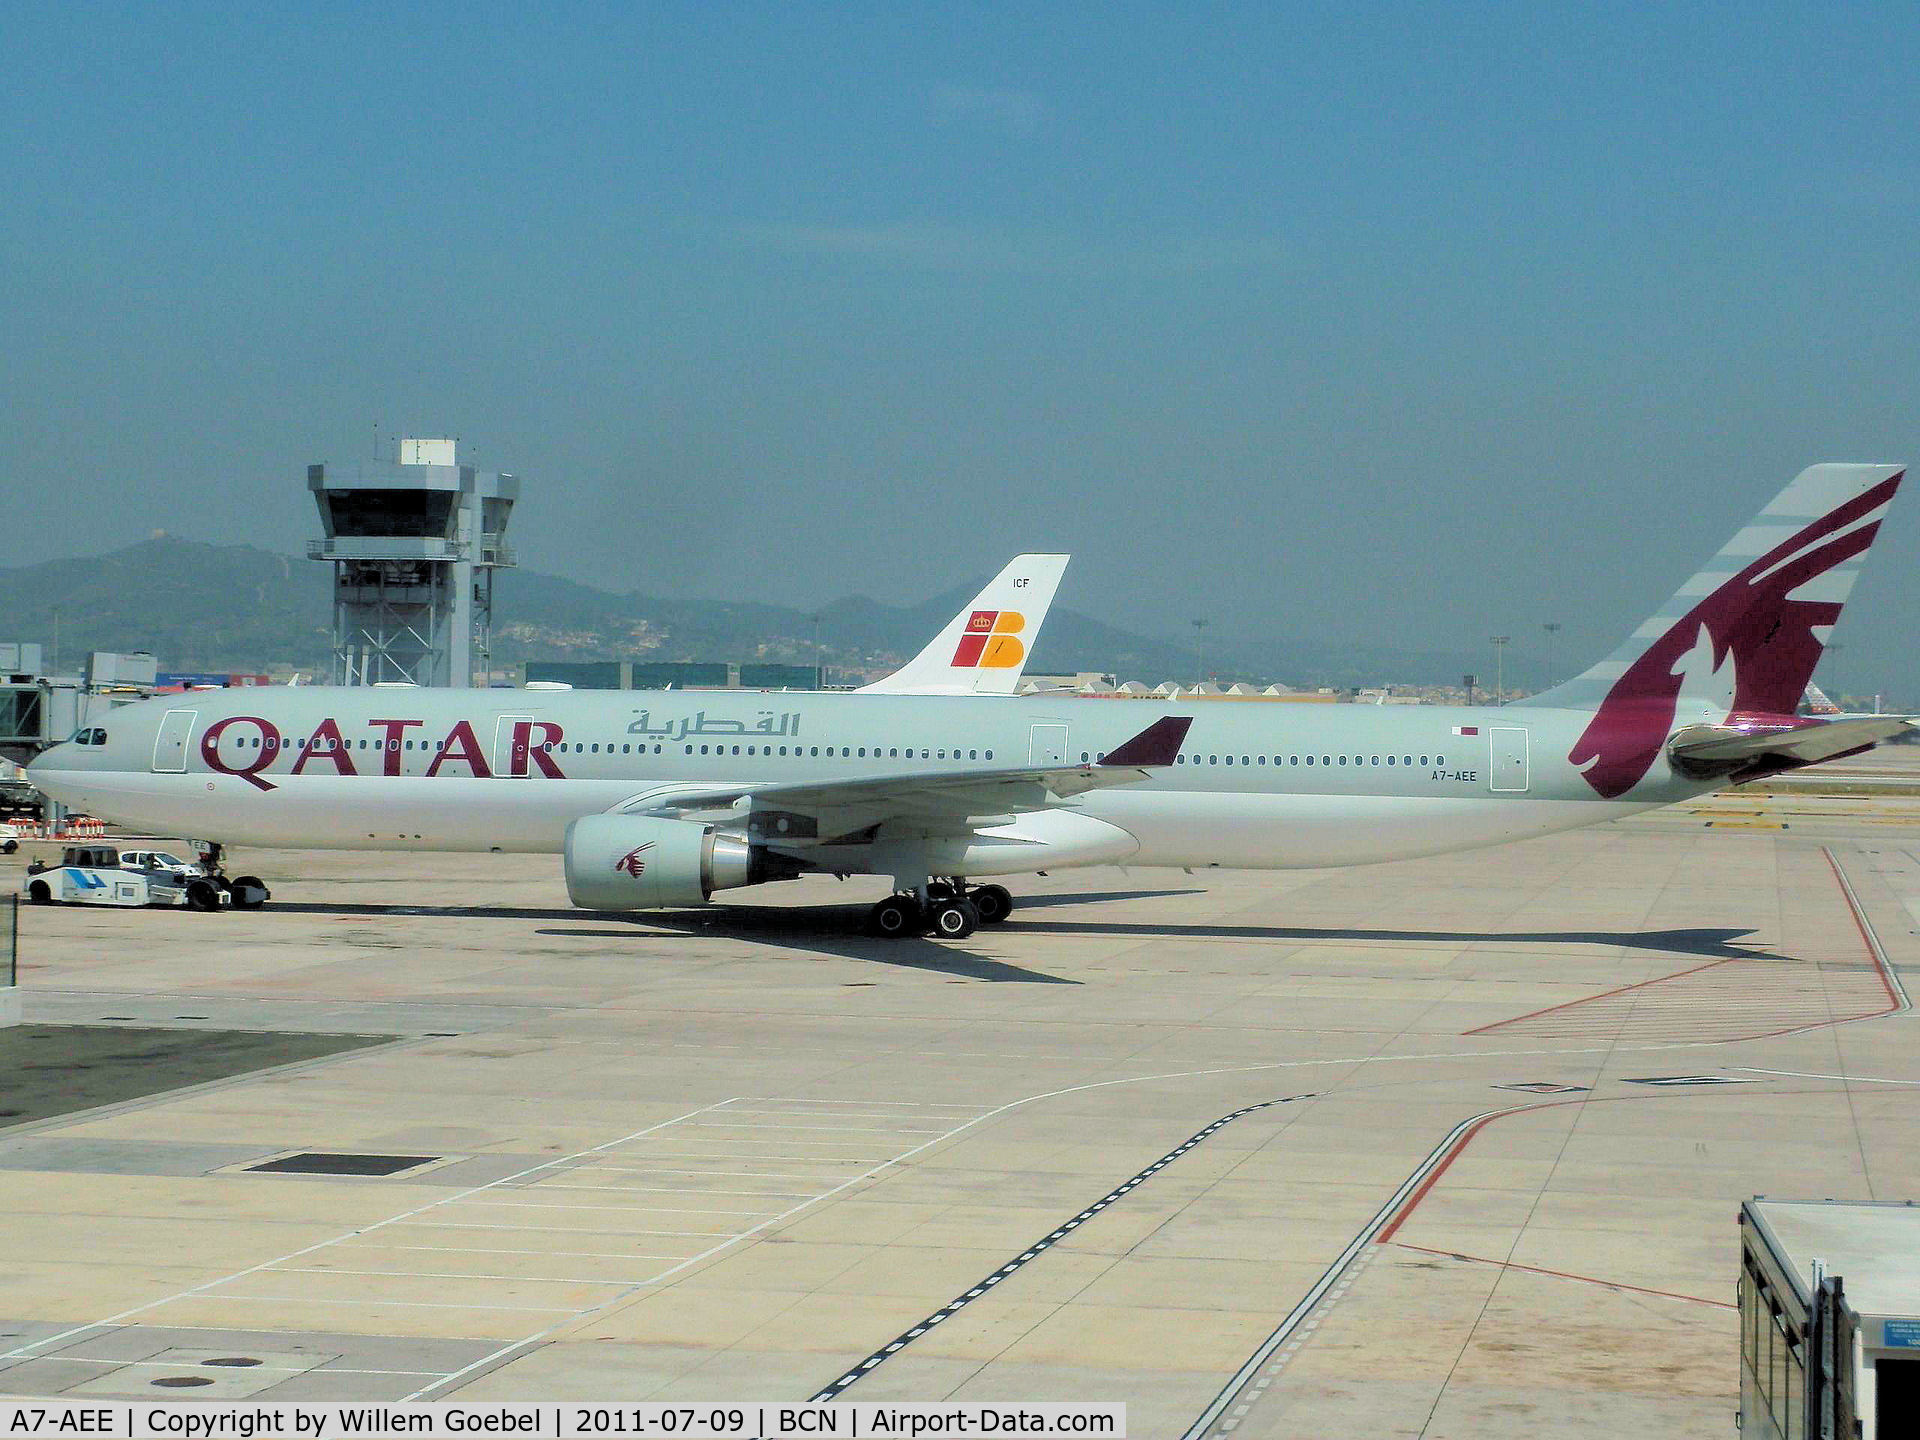 A7-AEE, 2005 Airbus A330-302 C/N 711, Ready for departure